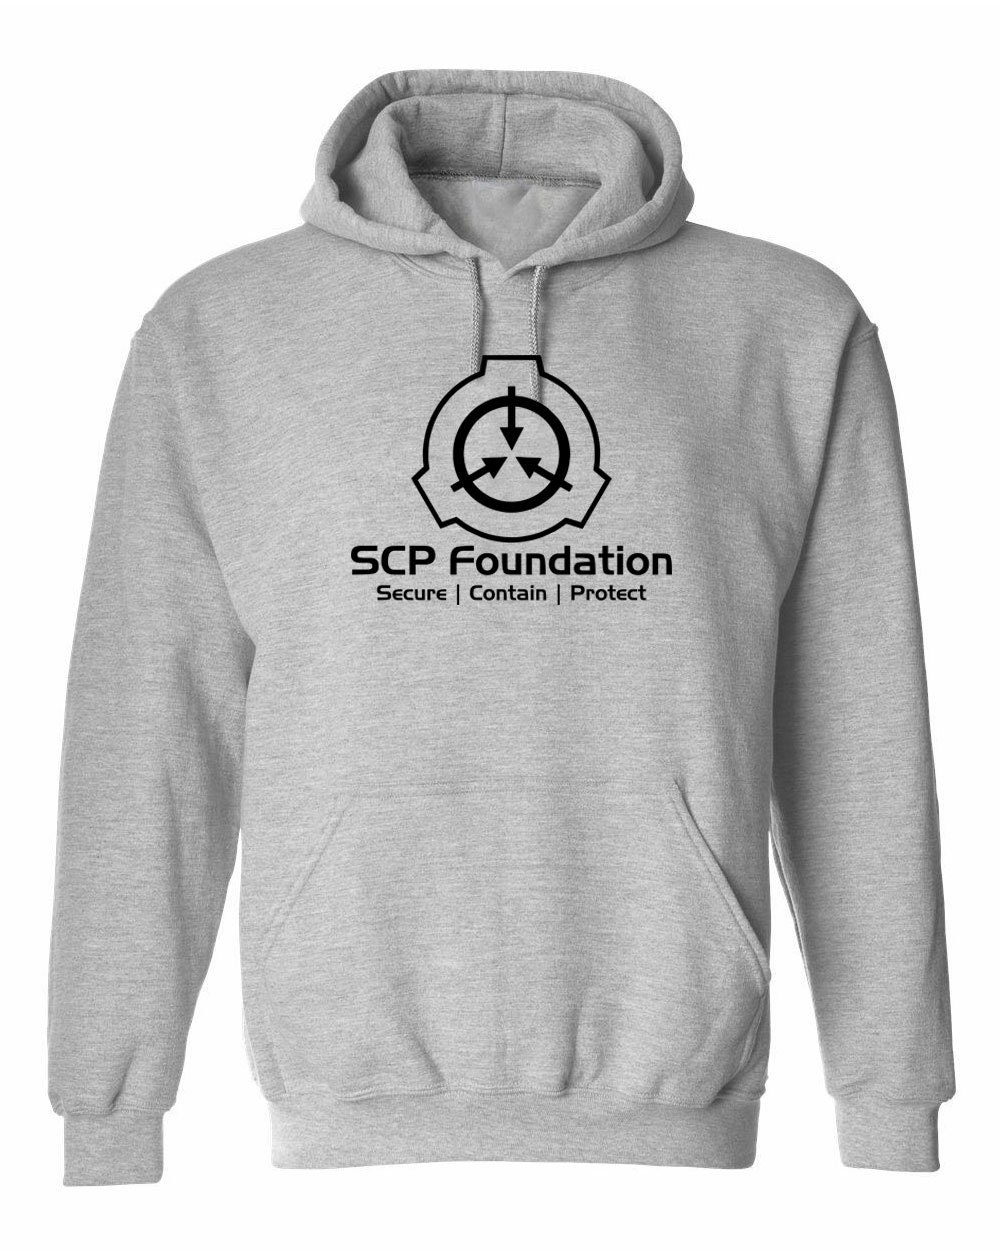 Item #: SCP-079 #securecontainprotect #scp #scpfile #scpfoundation #ho